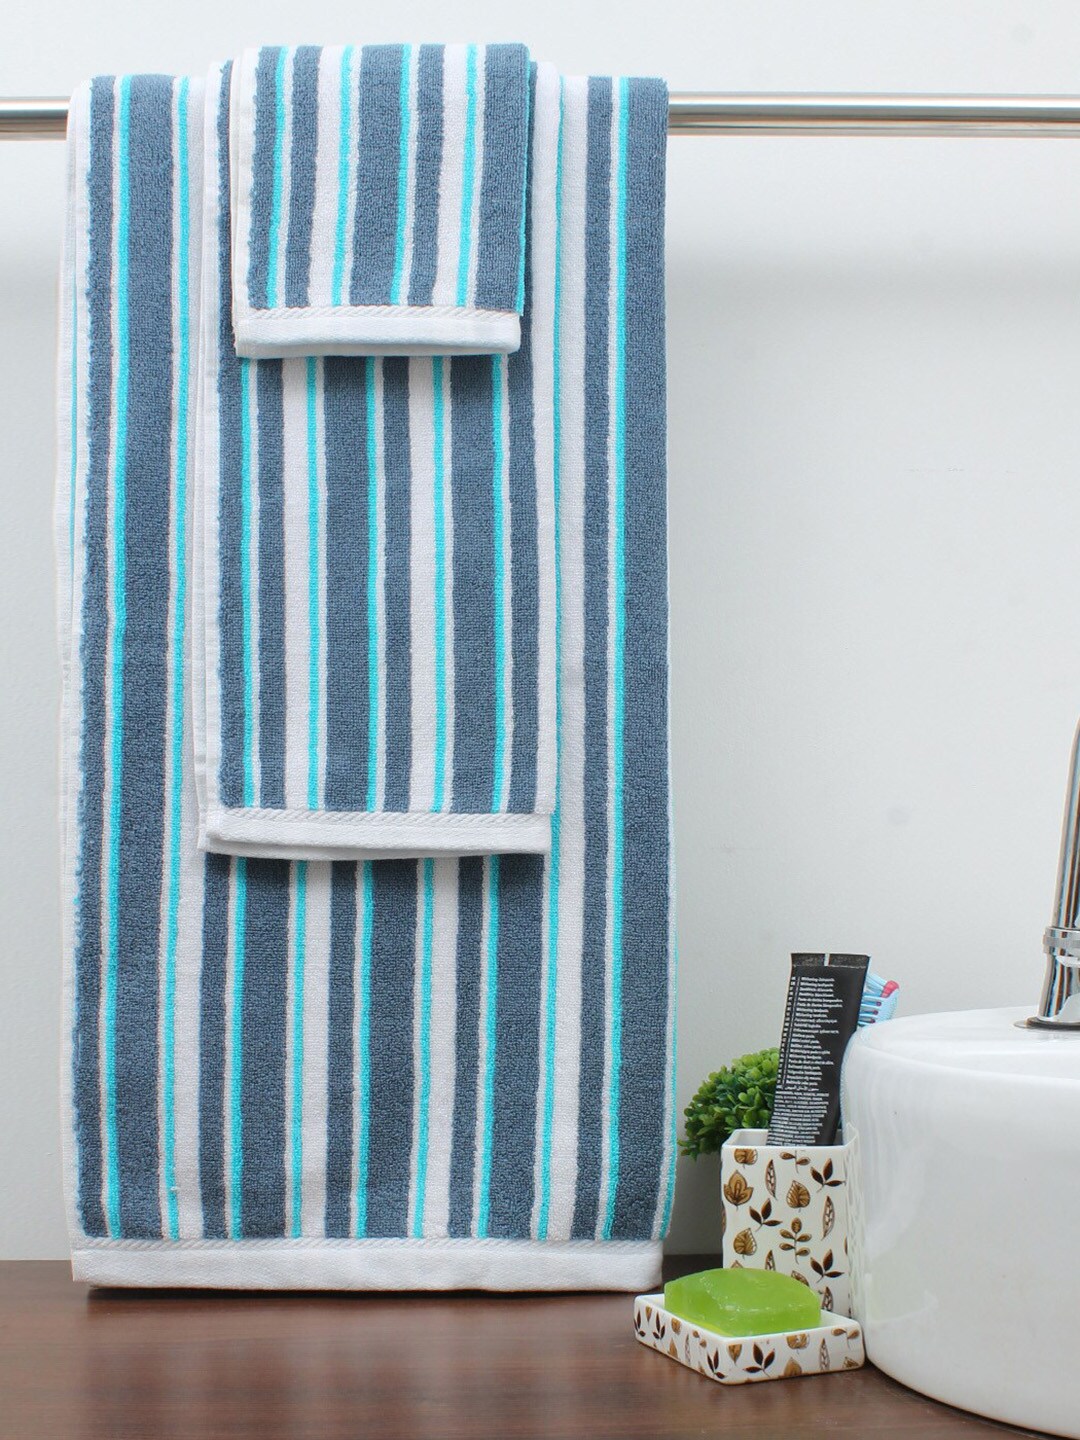 AVI Living Set Of 5 Blue & White Striped Cotton 550 GSM Towels Price in India